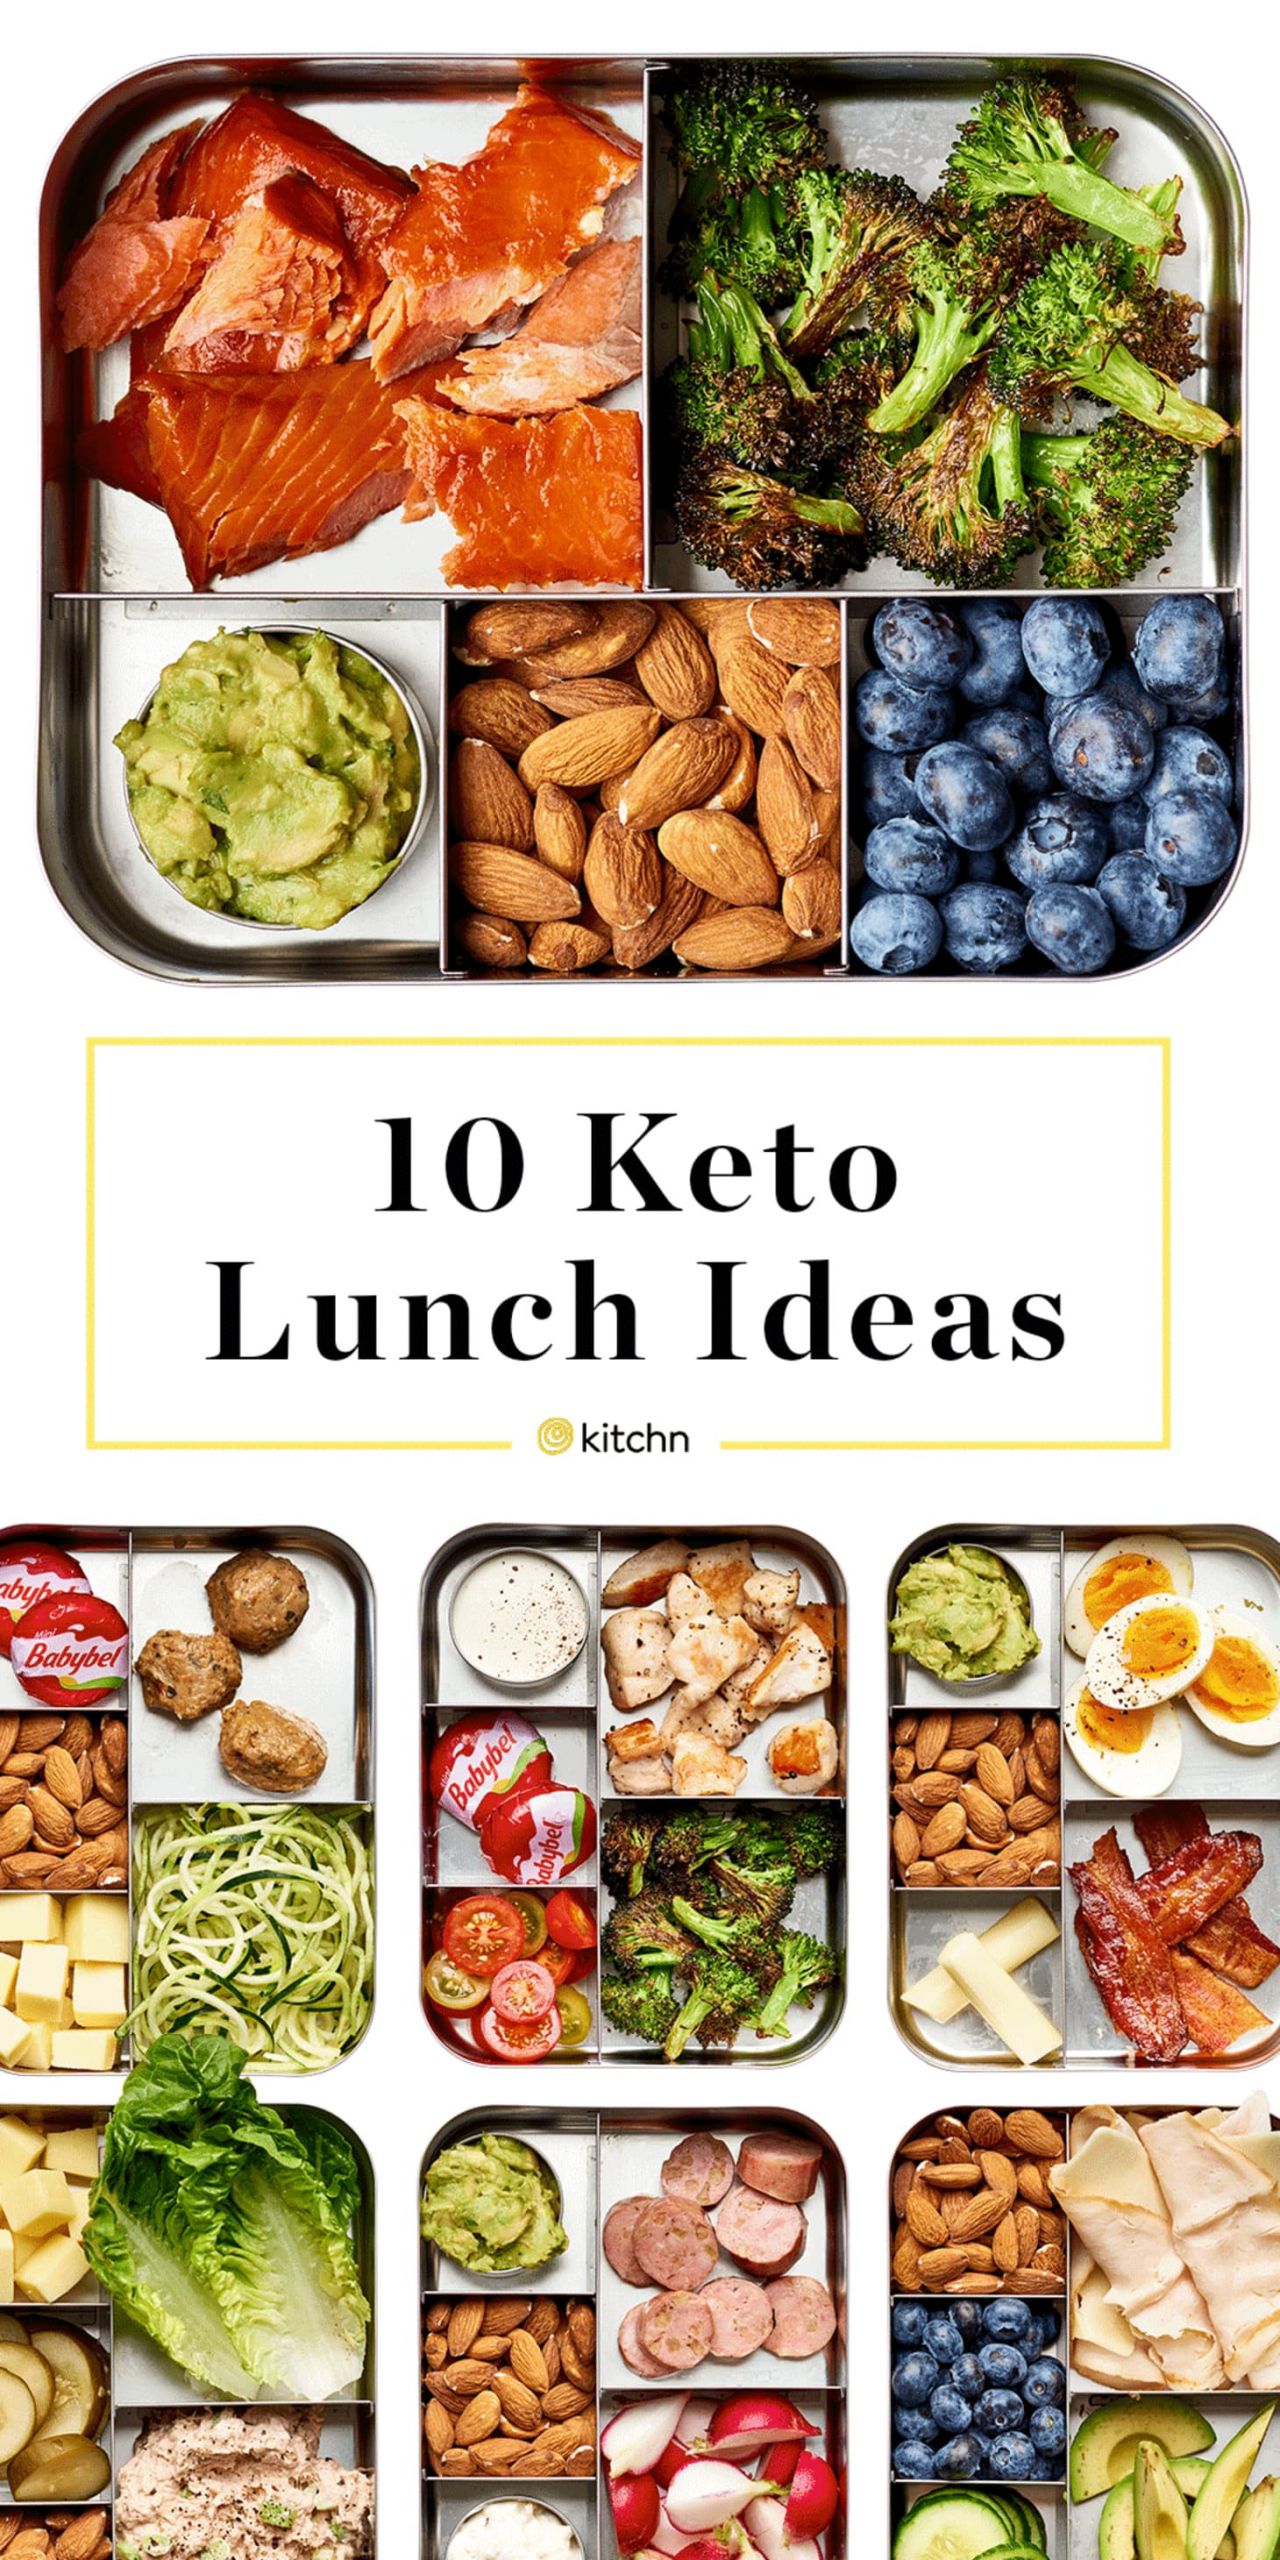 Clean Keto Recipes Lunch
 10 Easy Keto Lunch Ideas with Net Carb Counts